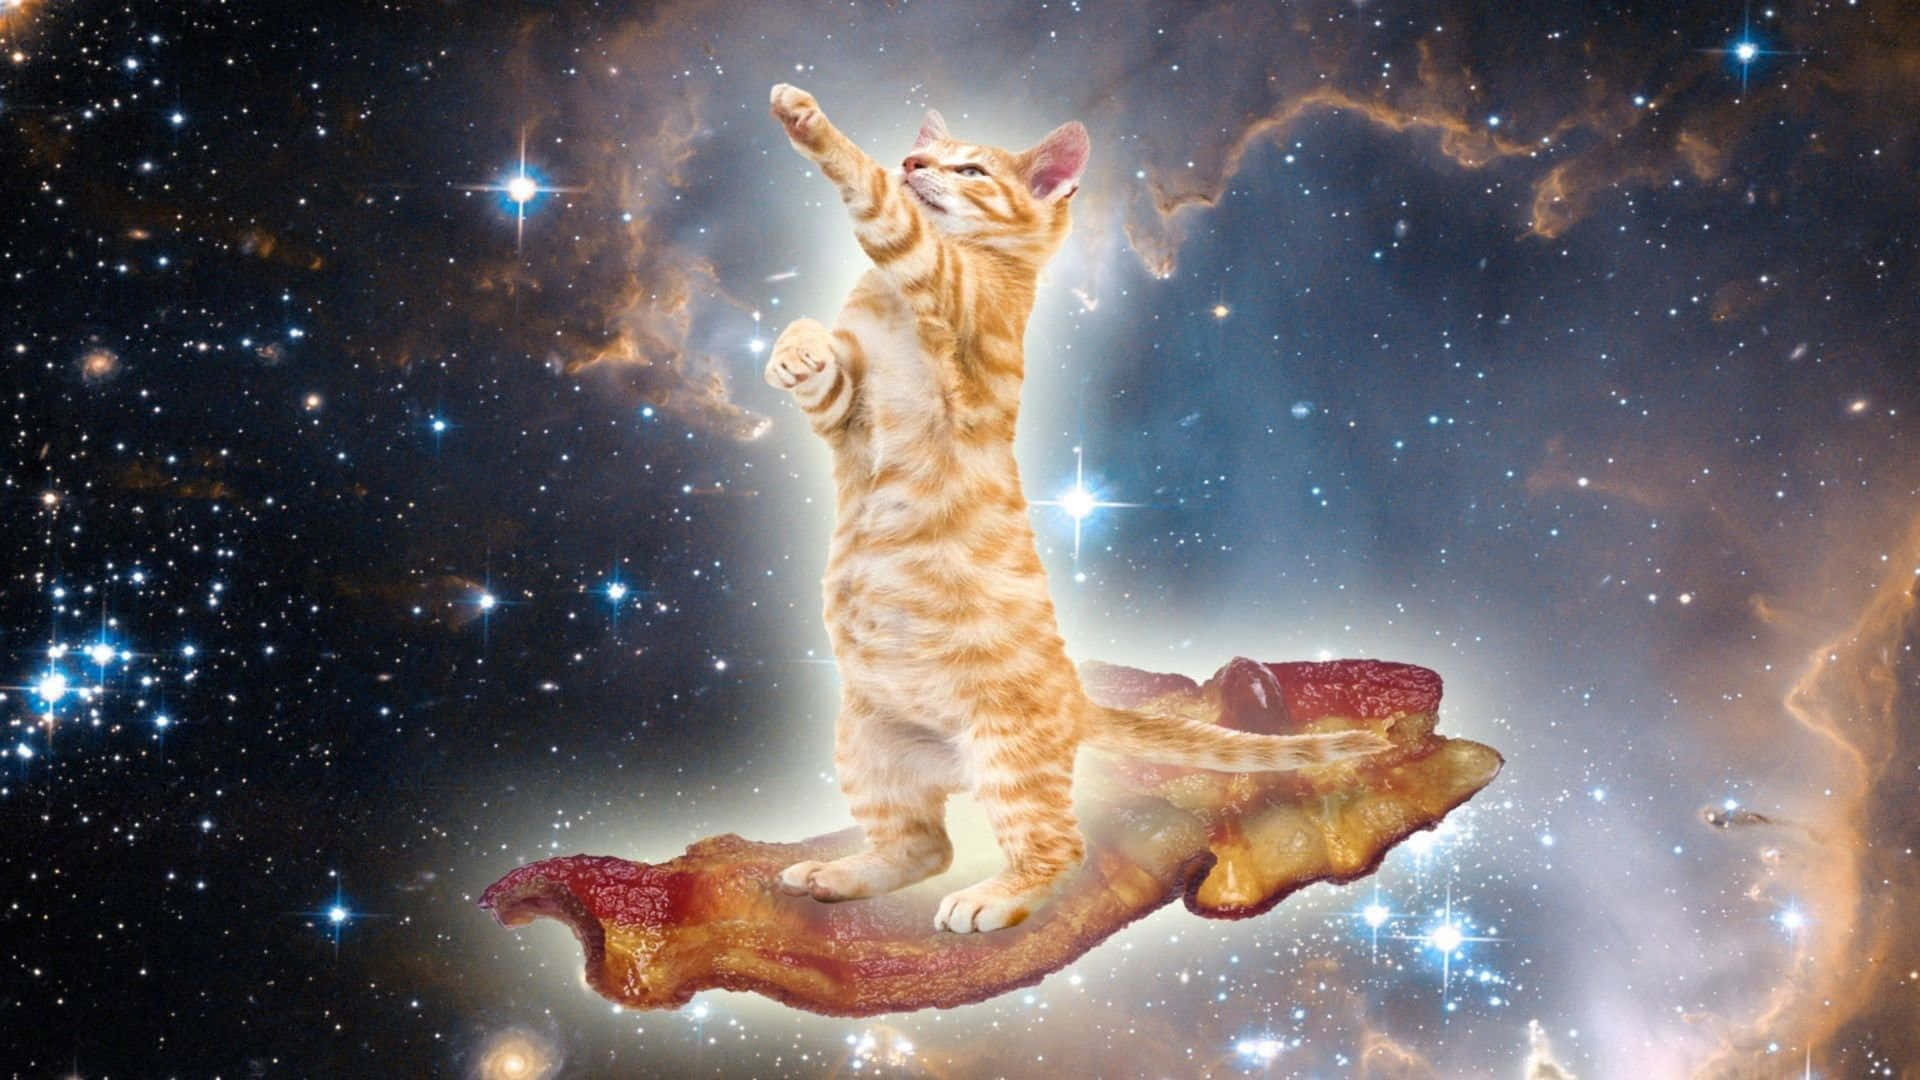 The purr-fect adventurers- cats explore the unknown depths of outer space! Wallpaper